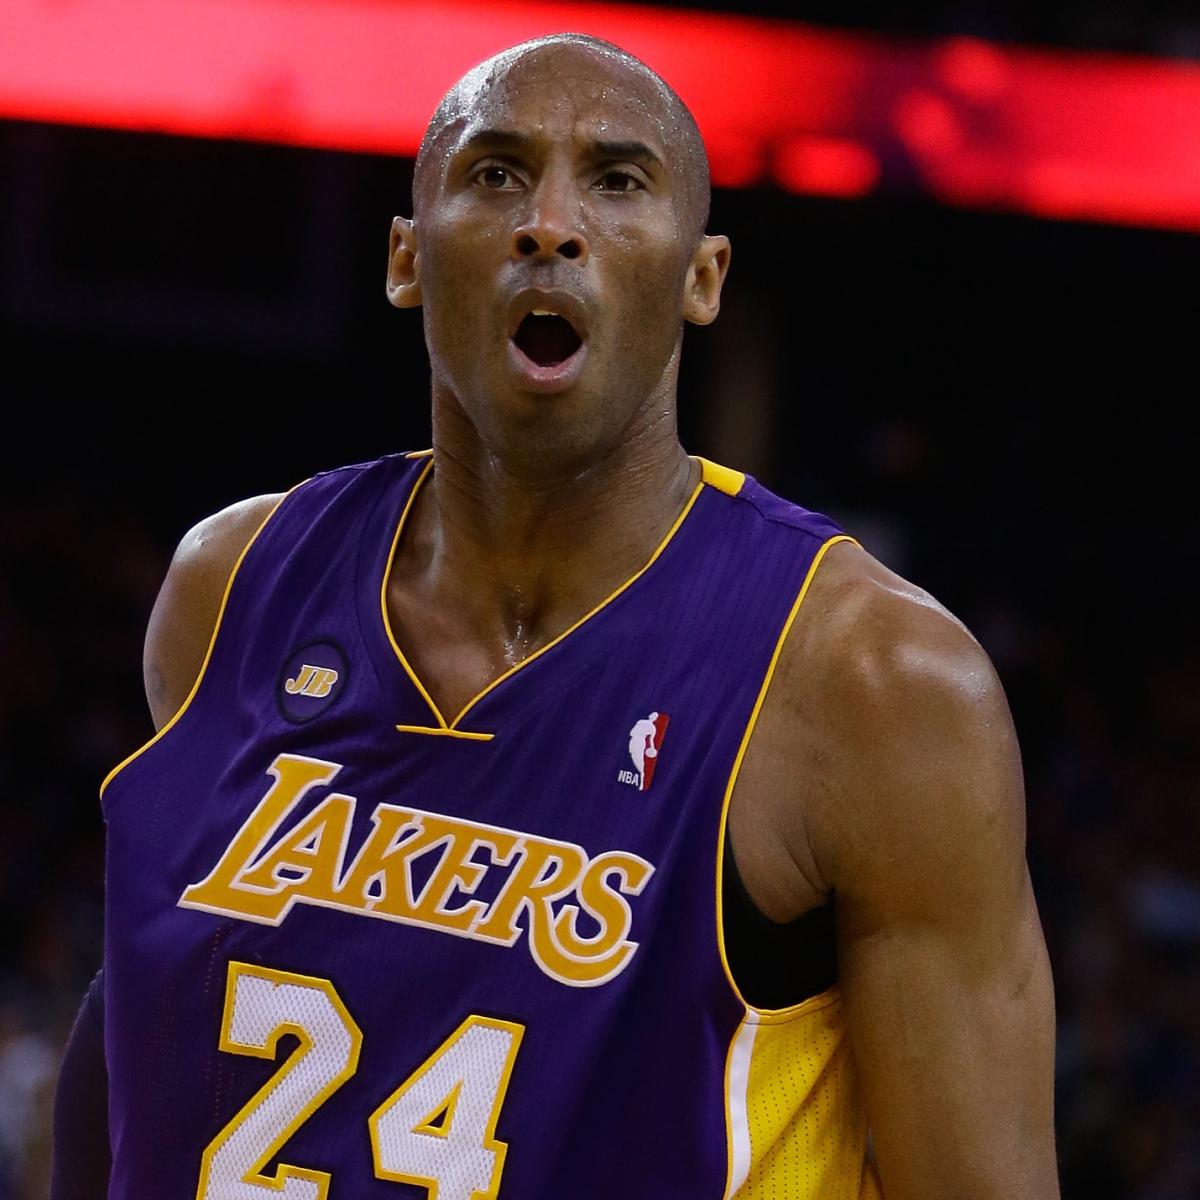 Kobe Bryant Made a Rookie Mistake with His Post-Retirement Style